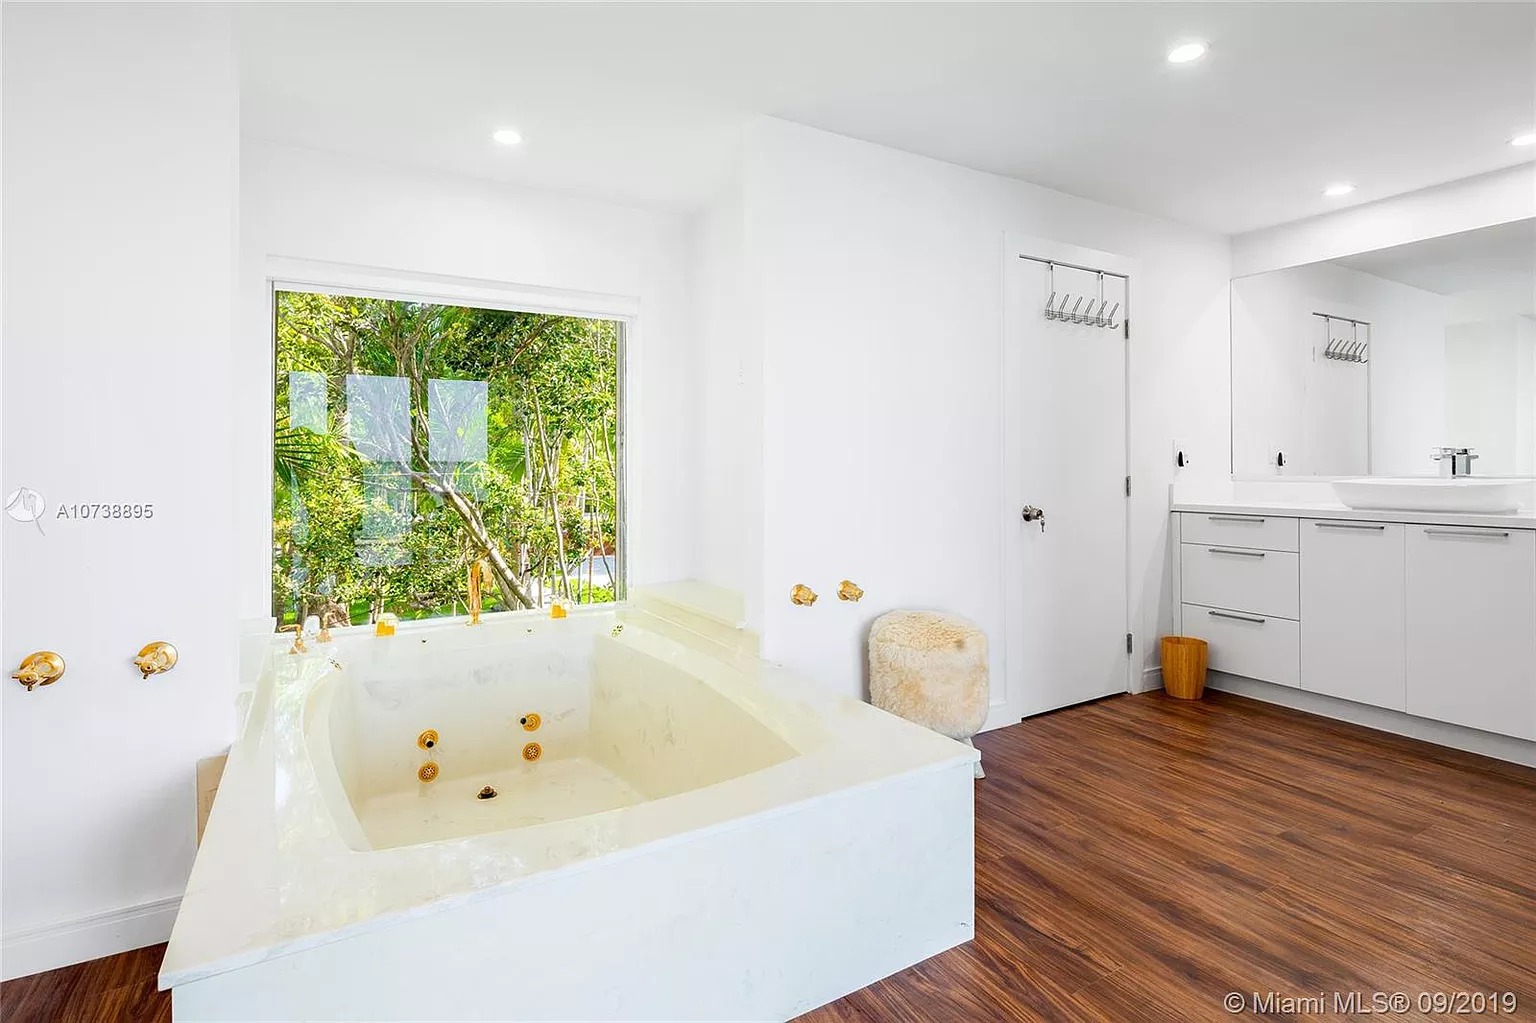 1413 N Venetian Way, Miami Beach, FL 33139 - $6,790,000 home for sale, house images, photos and pics gallery